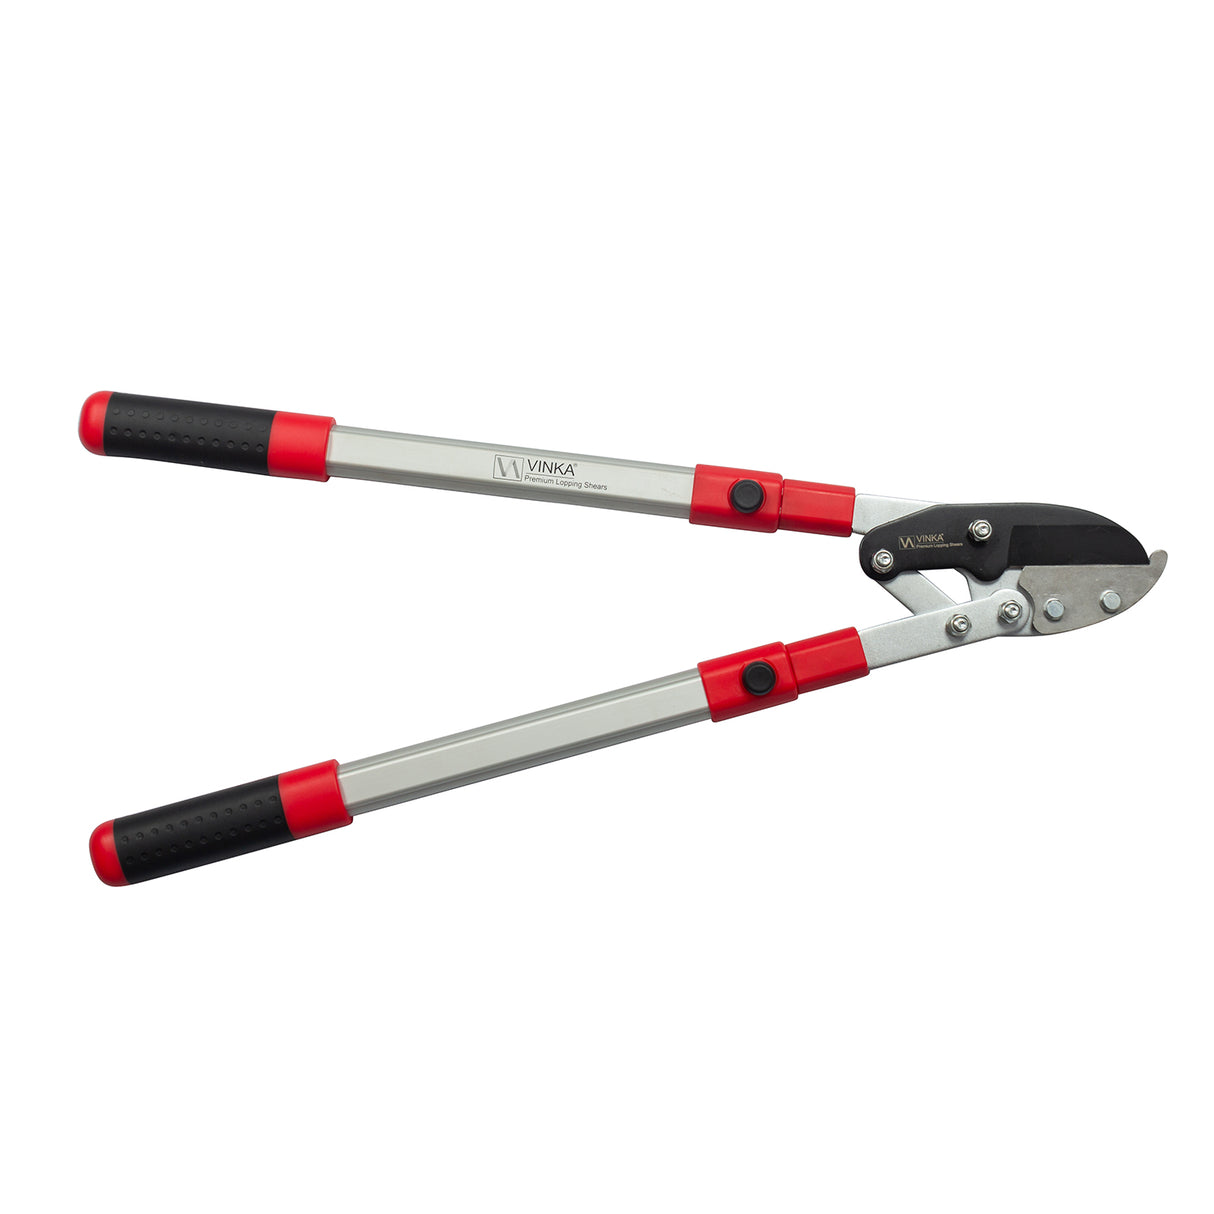 VAL-006 Anvil Telescopic Lopper For Tree Branch Pruning Upto 2 Inch